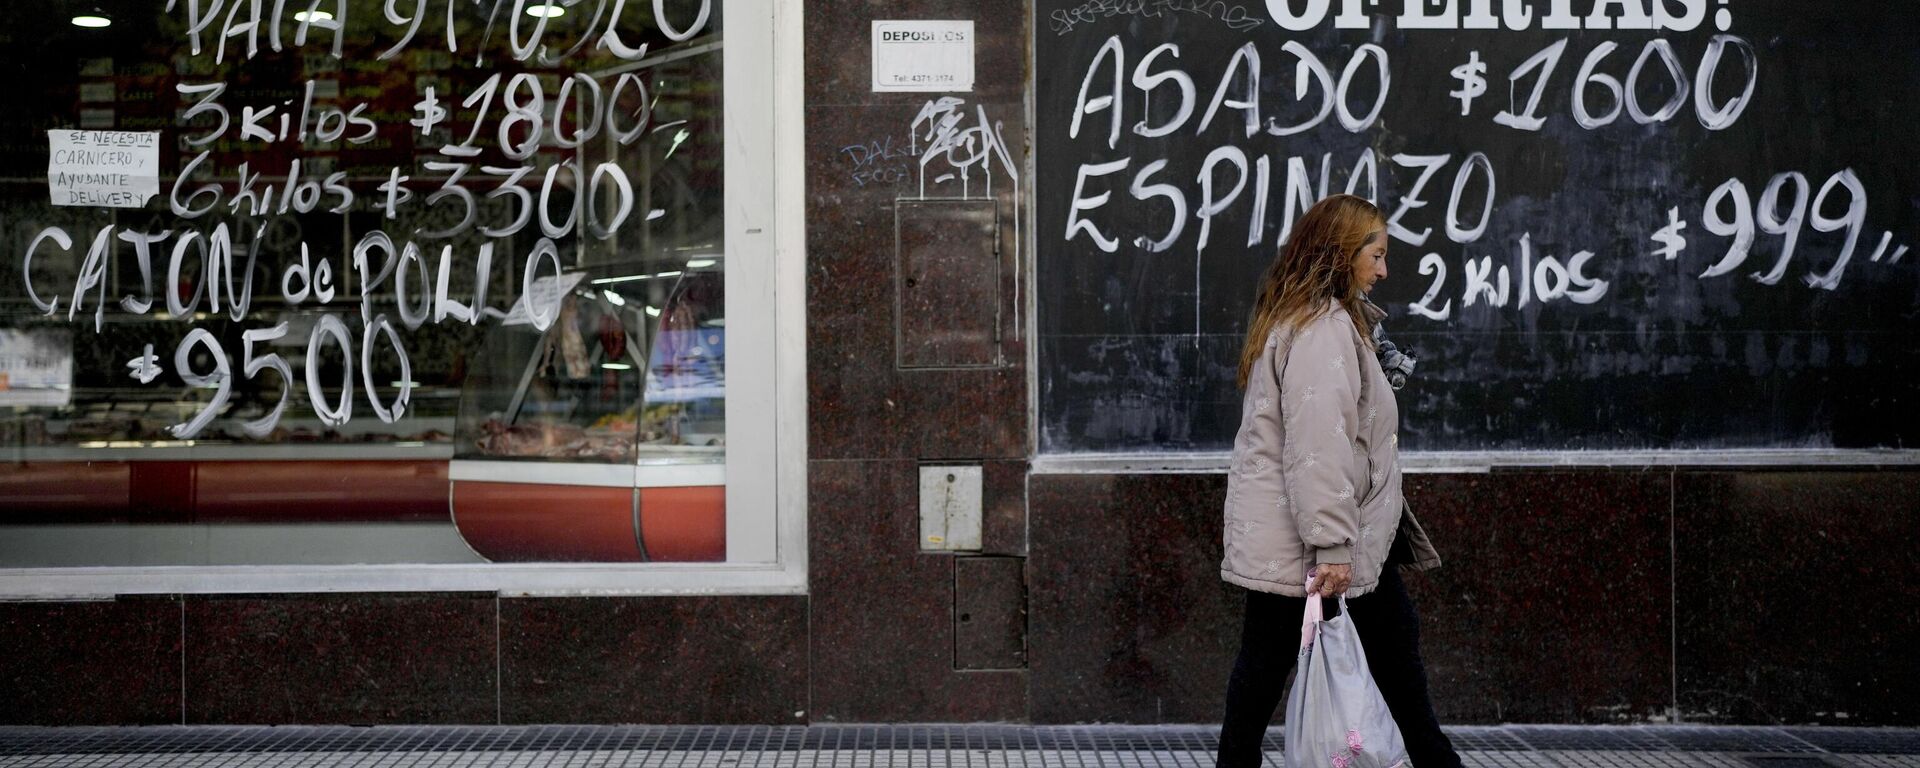 A woman walks by a meat market in Buenos Aires, Argentina, Thursday, May 11, 2023. According to a recent World Bank Food Security report, Argentina has seen a 107% annual inflation rate in food prices. - Sputnik International, 1920, 23.10.2023